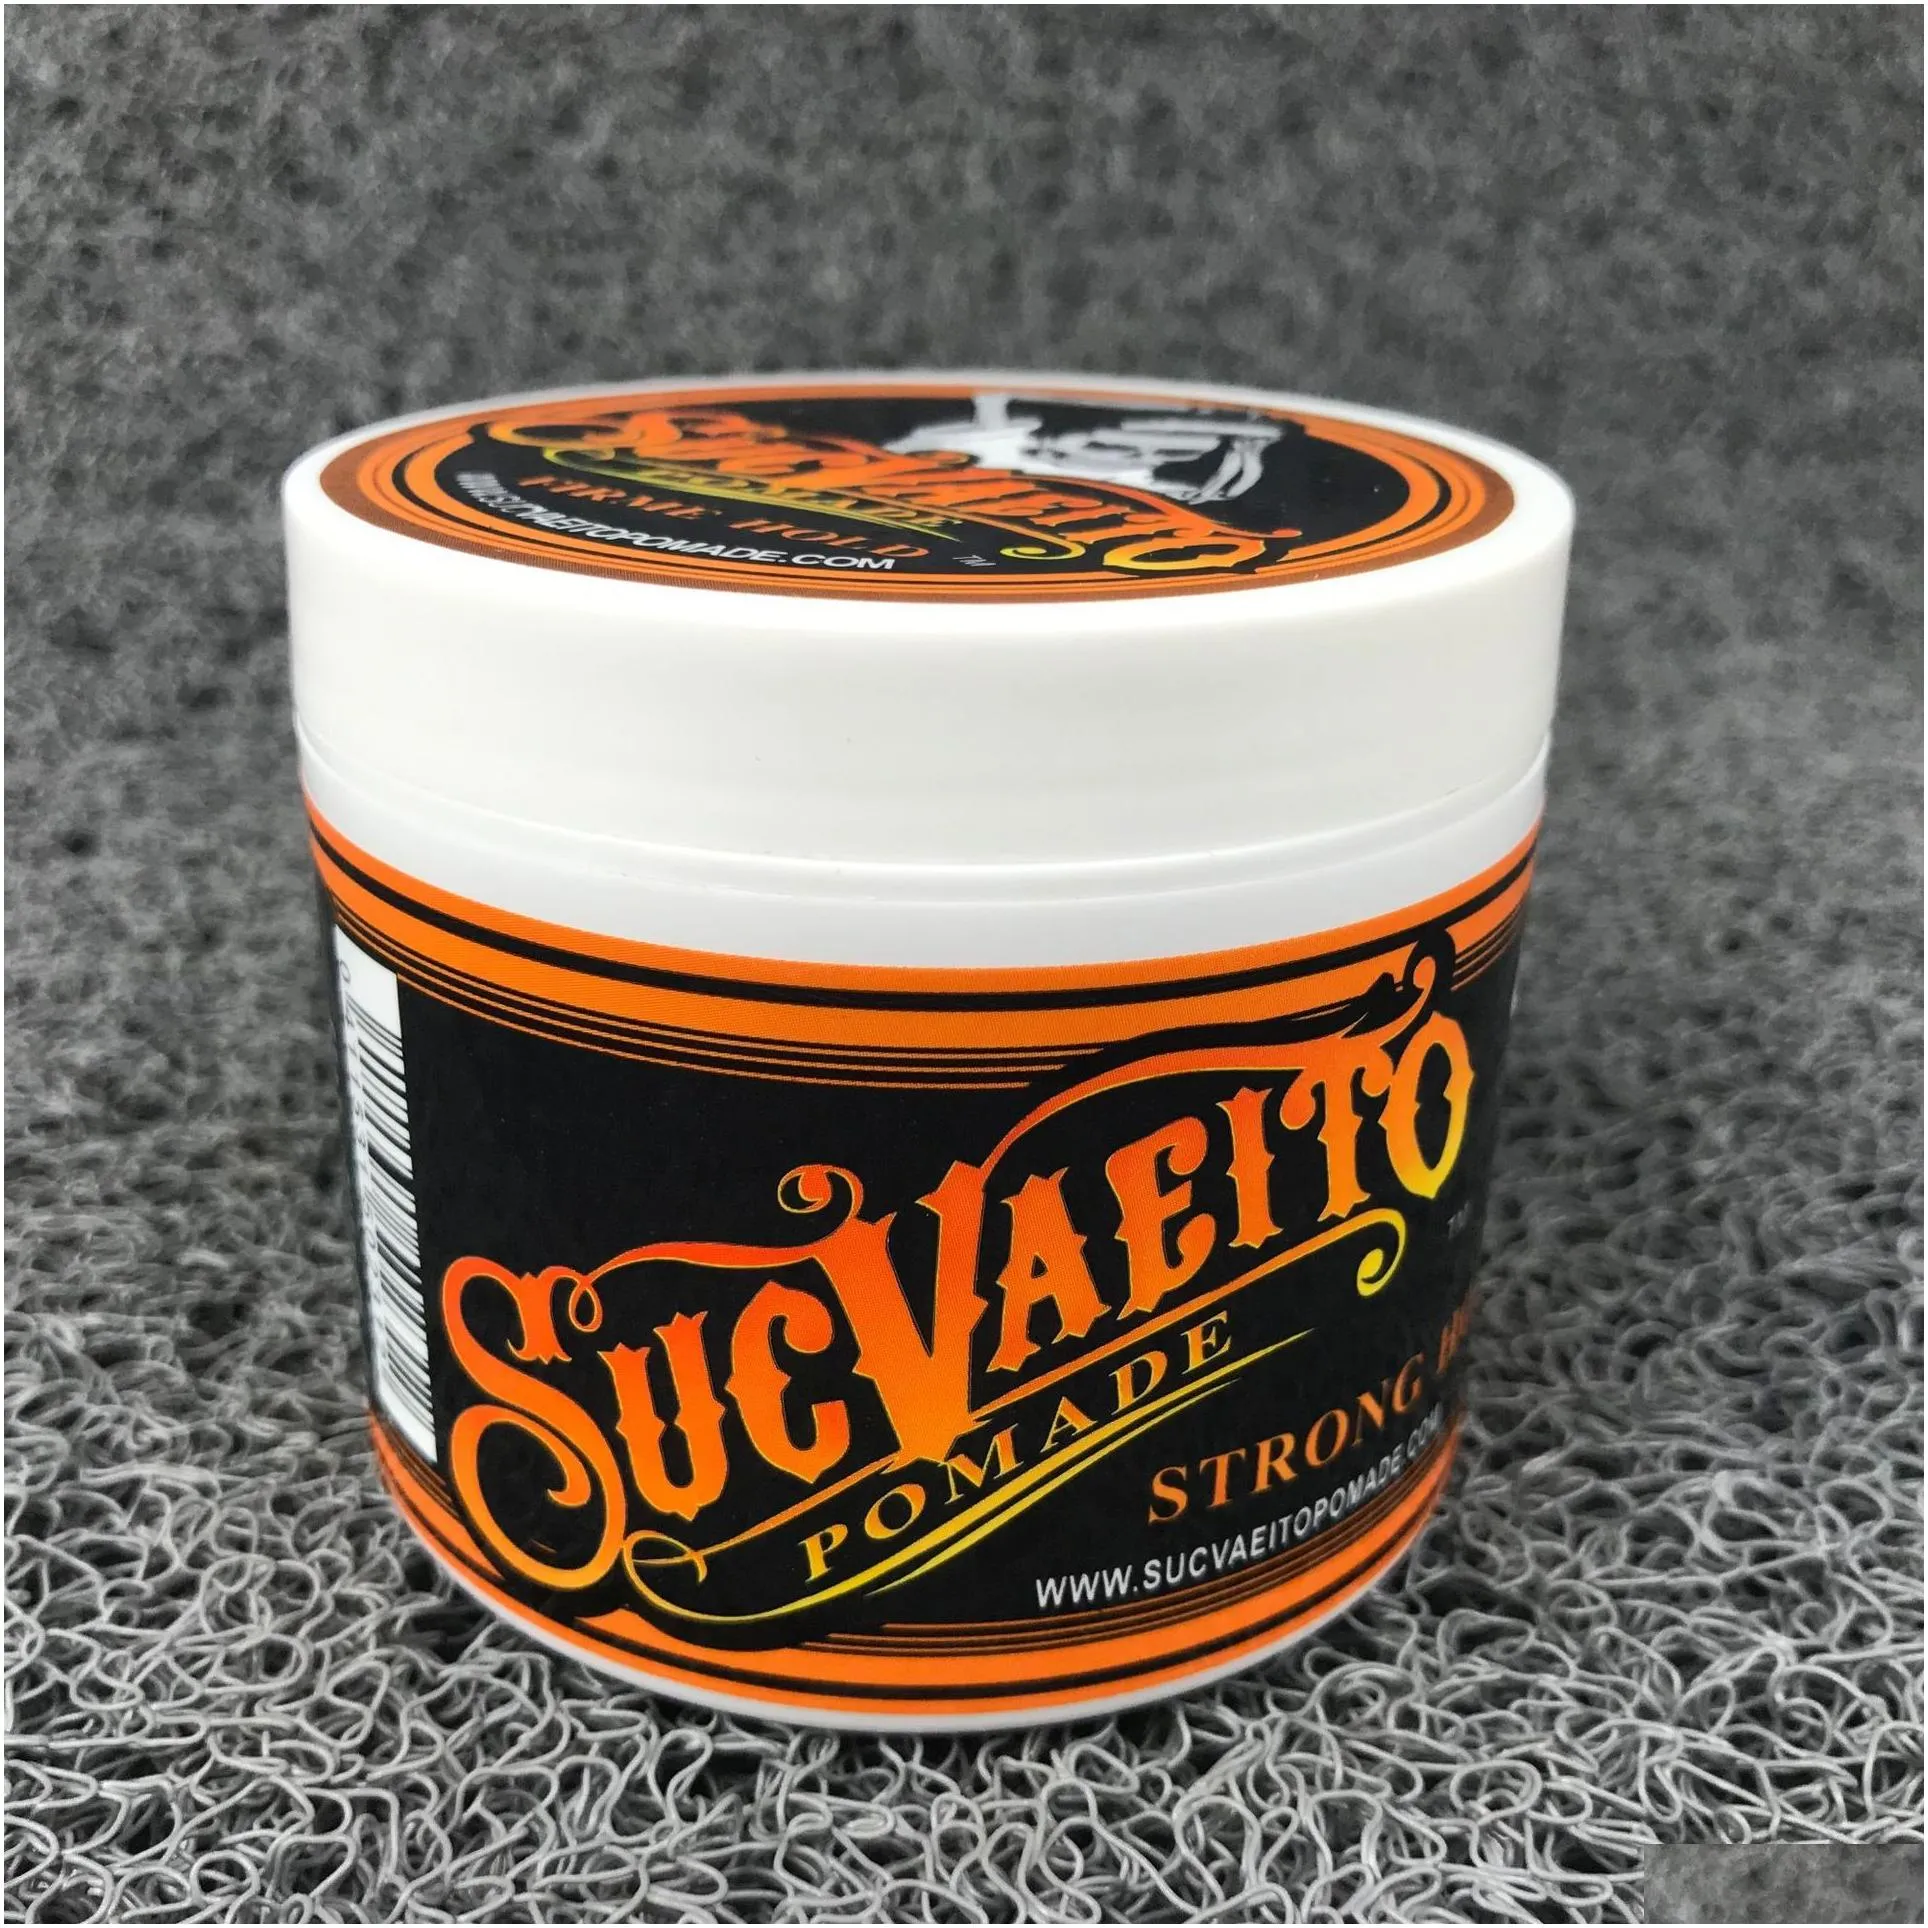 suavecito pomade gel 4oz 113g strong style restoring ancient ways is big skeleton hair slicked back hair oil wax mud